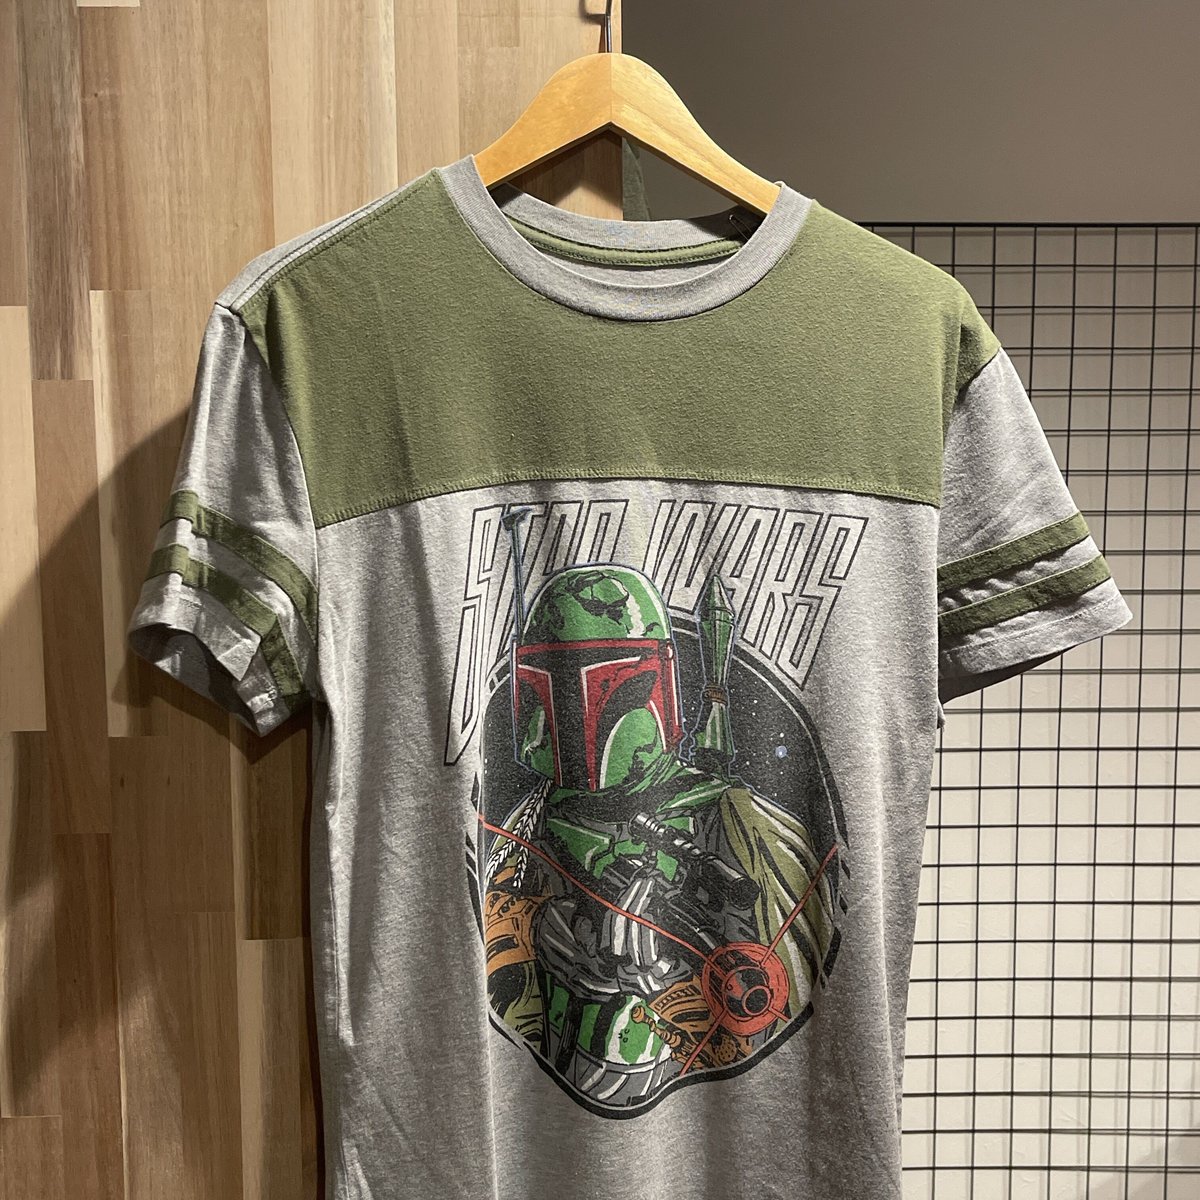 STAR WARS ボバ・フェット プリントTシャツ A708 | 古着屋Quest